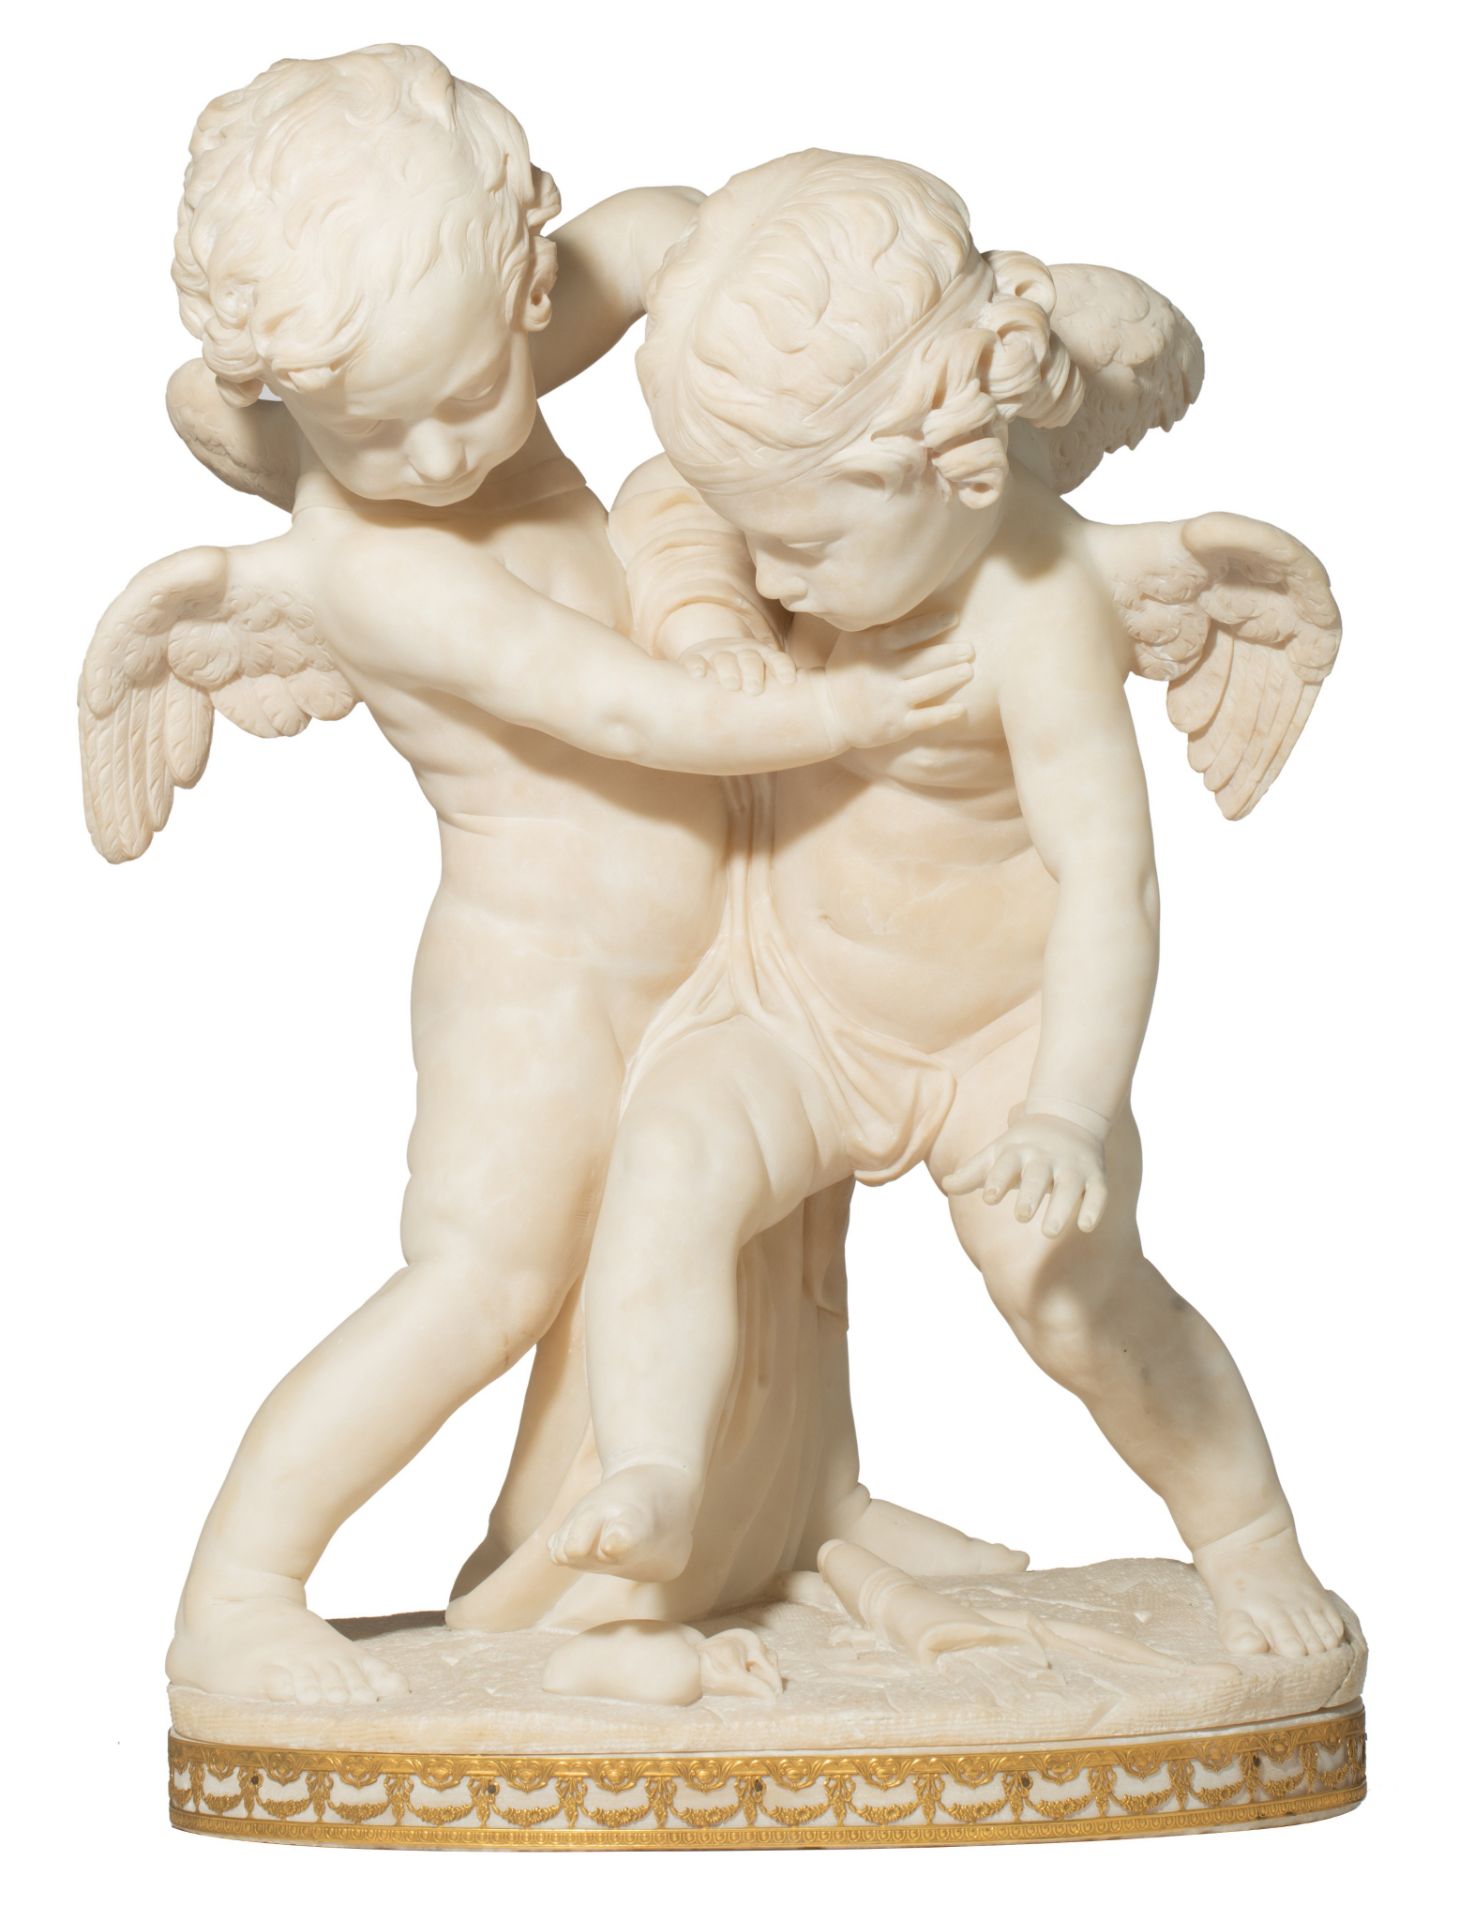 After Etienne Maurice Falconet (1716-1791), 'Bataille d'Amour', Carrara marble, H 70 - W 48 cm